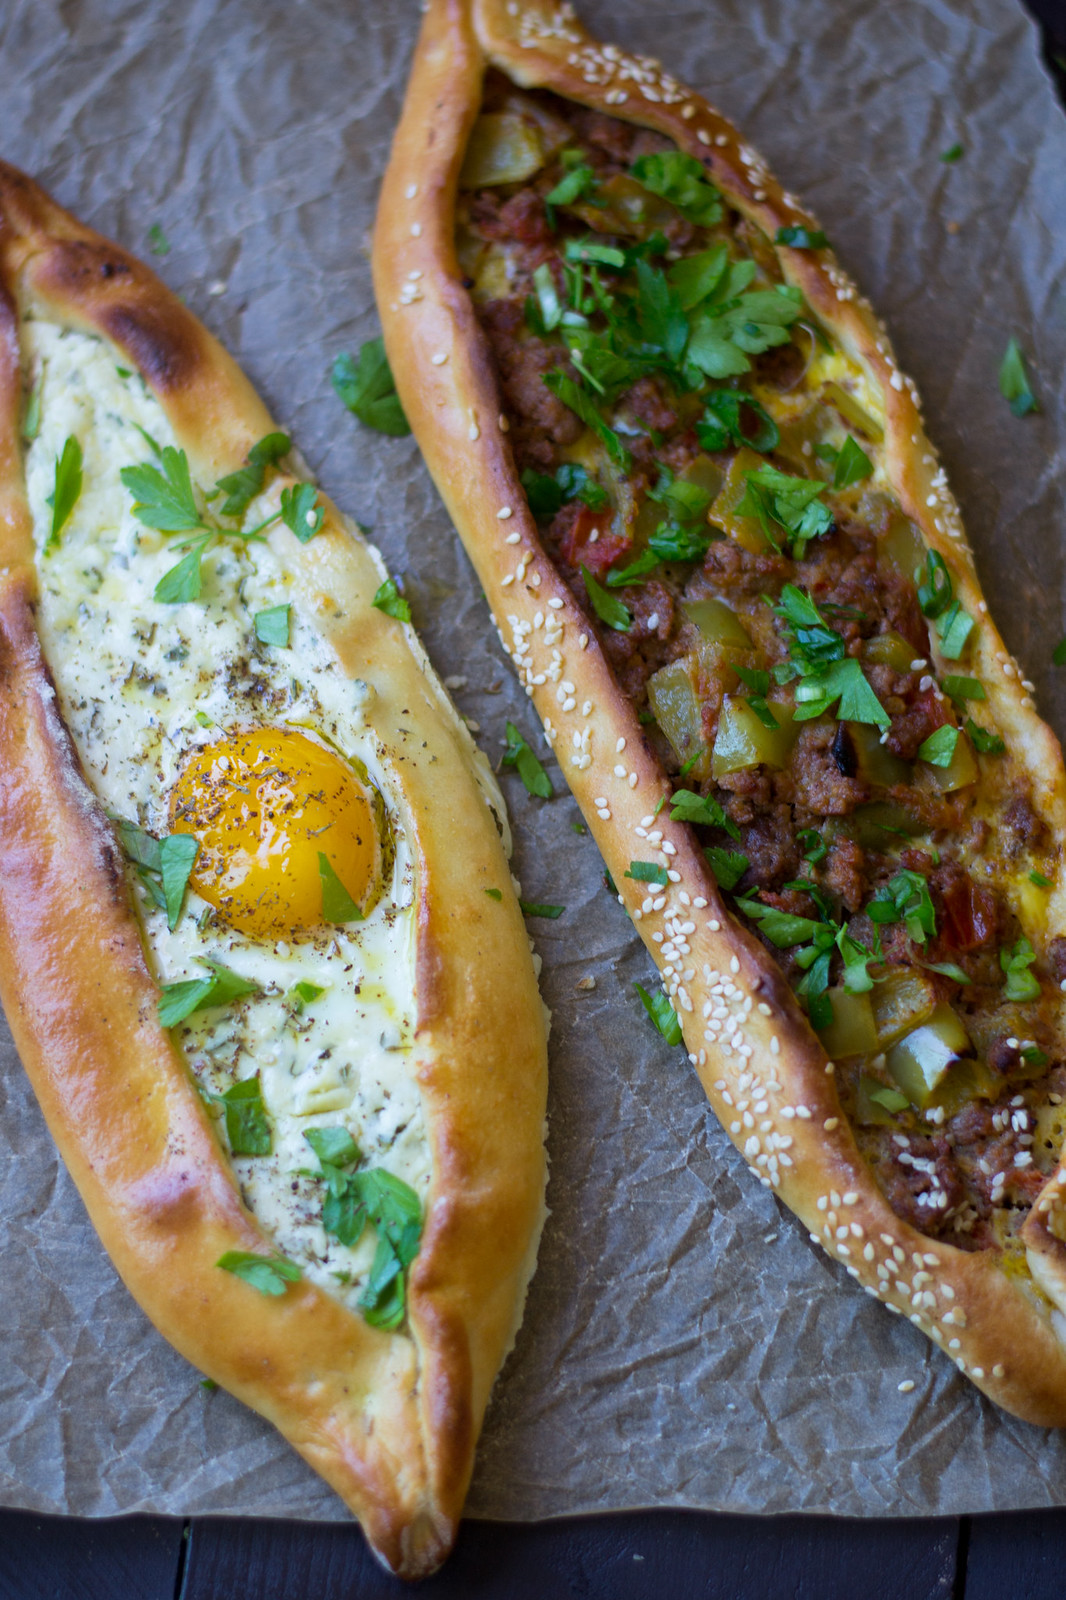 Turkish Pide (aka pizza) is a Turkish comfort food favorite! Here are 2 different fillings, one with meat and peppers and the other with cheese and egg.